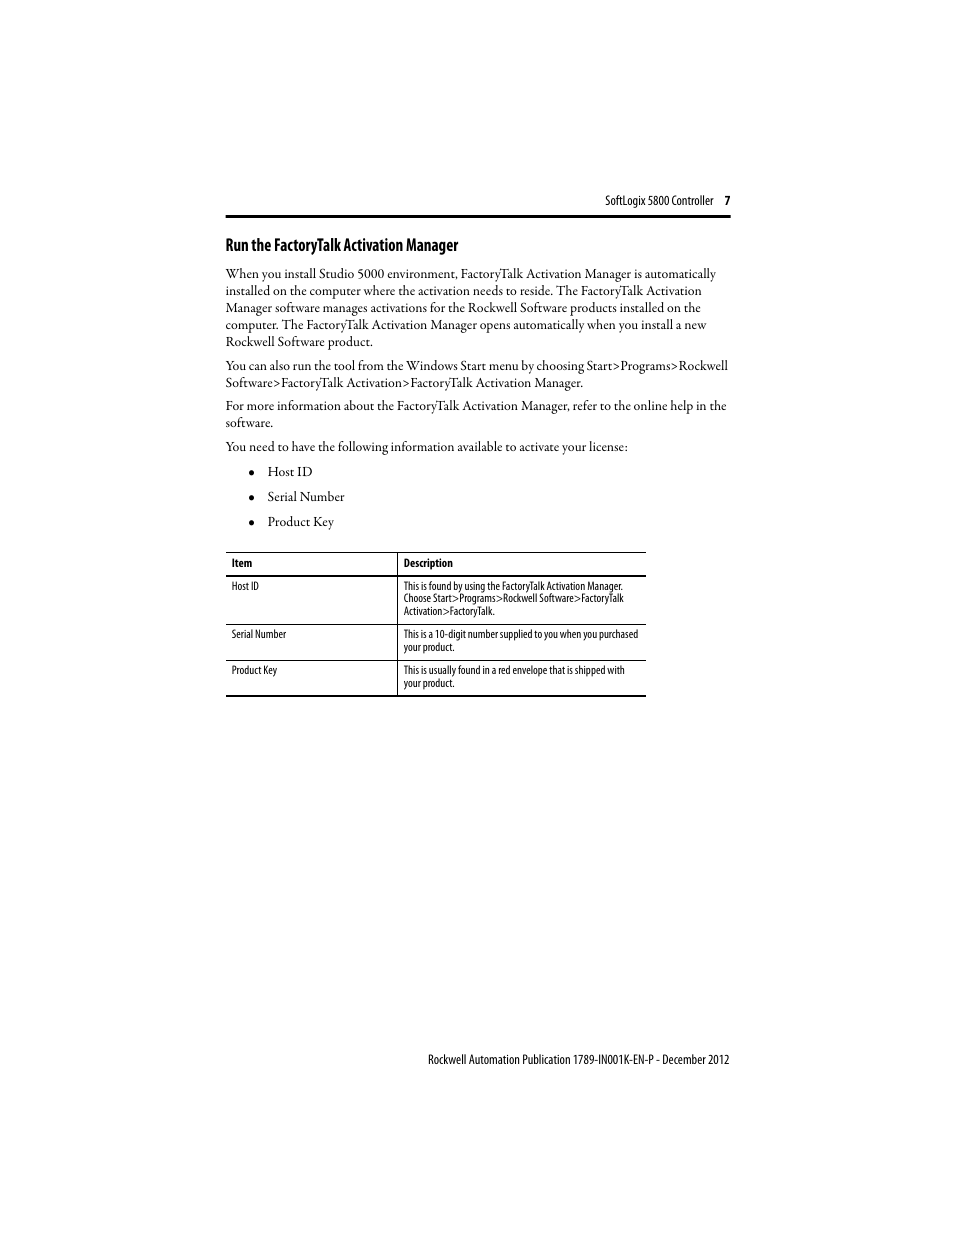 Run the factorytalk activation manager | Rockwell Automation 1789-L10_L30_L60 SoftLogix 5800 Controller Installation Instructions User Manual | Page 7 / 14